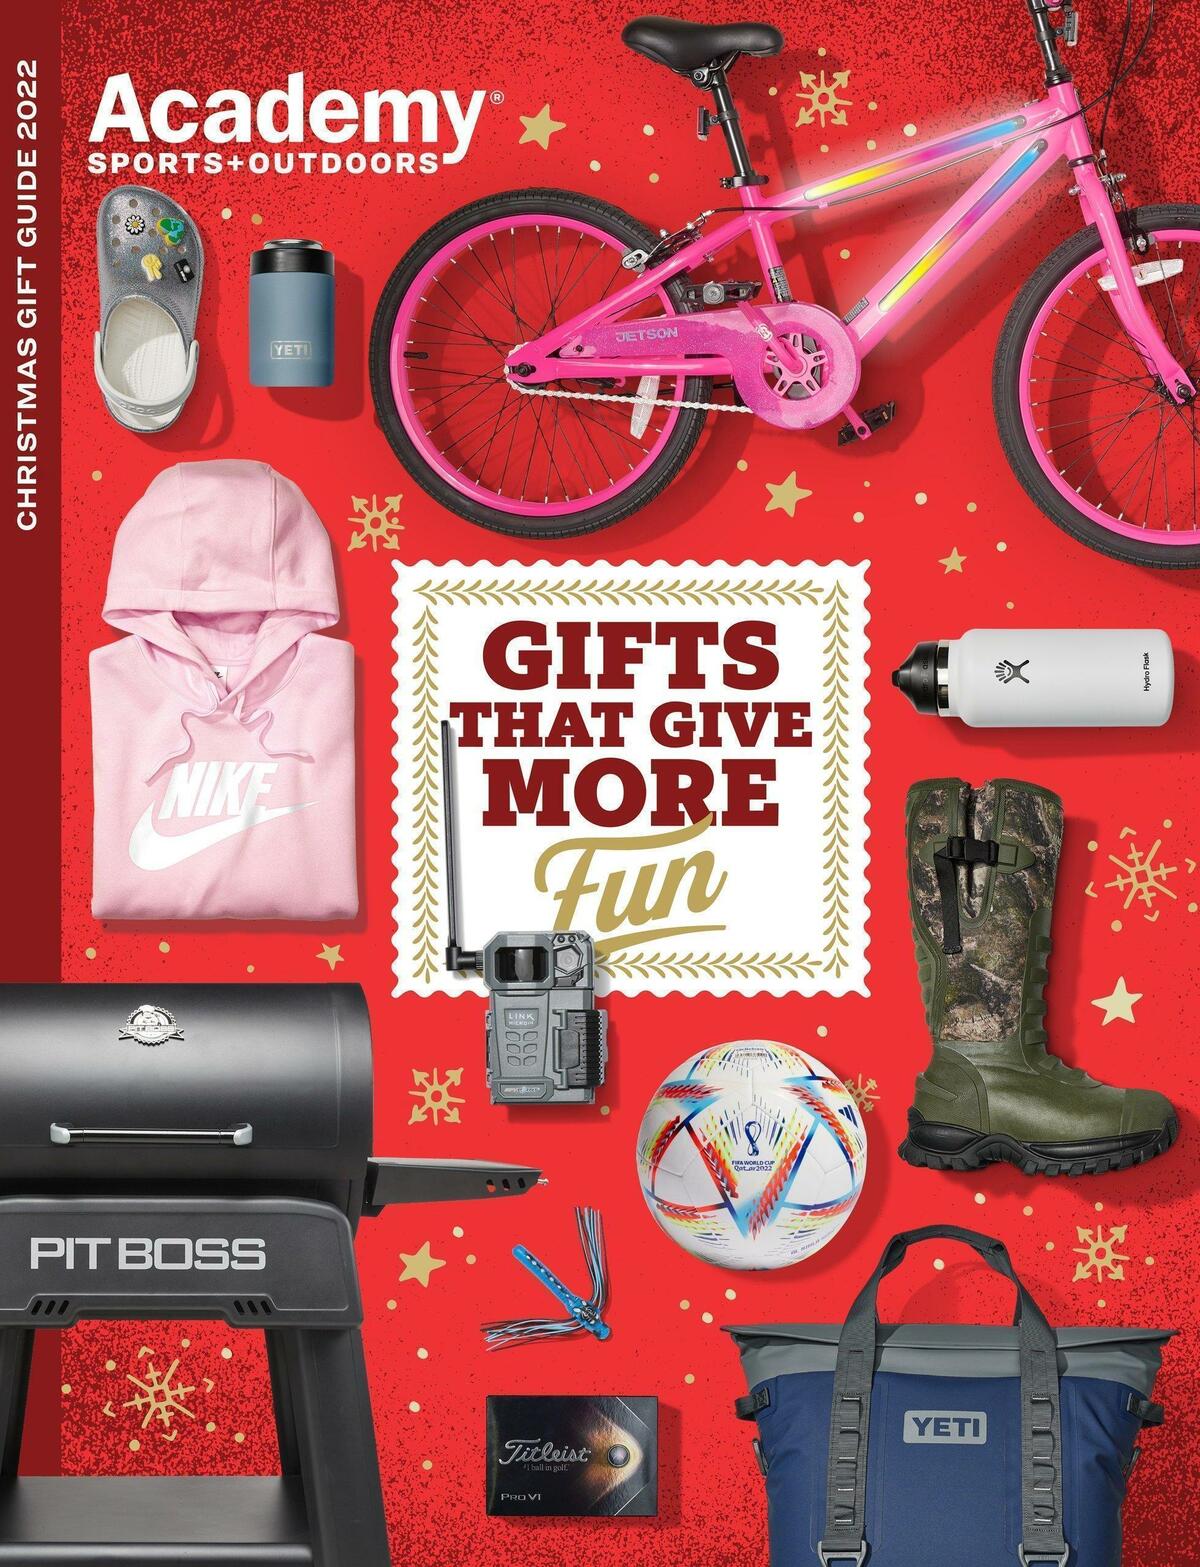 Academy Sports + Outdoors Holiday Guide Weekly Ad from October 31